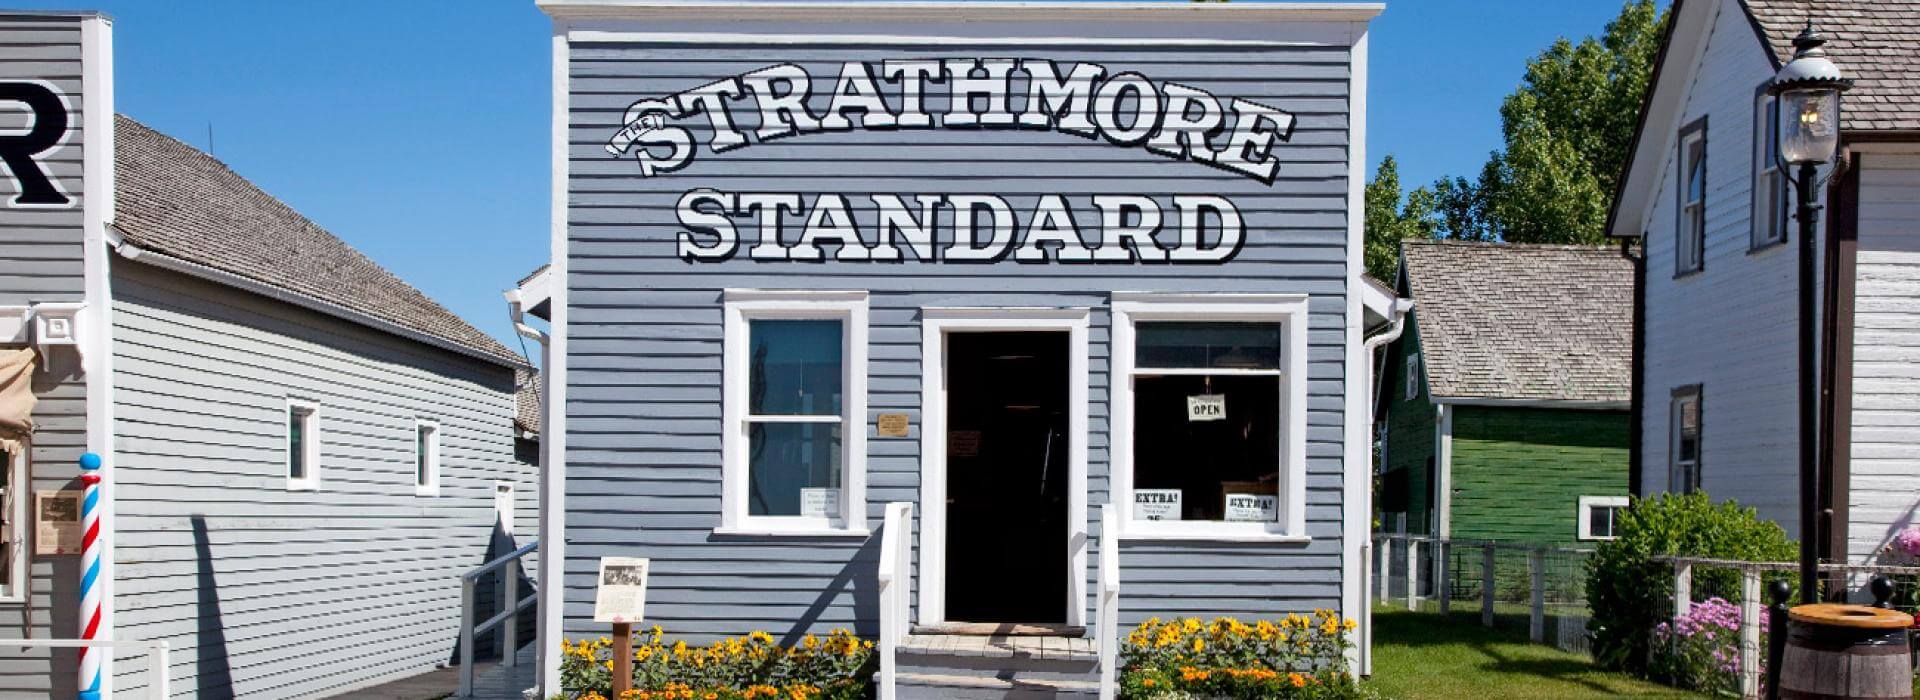 Grey 2 story building with a sign reading Strathmore Standard